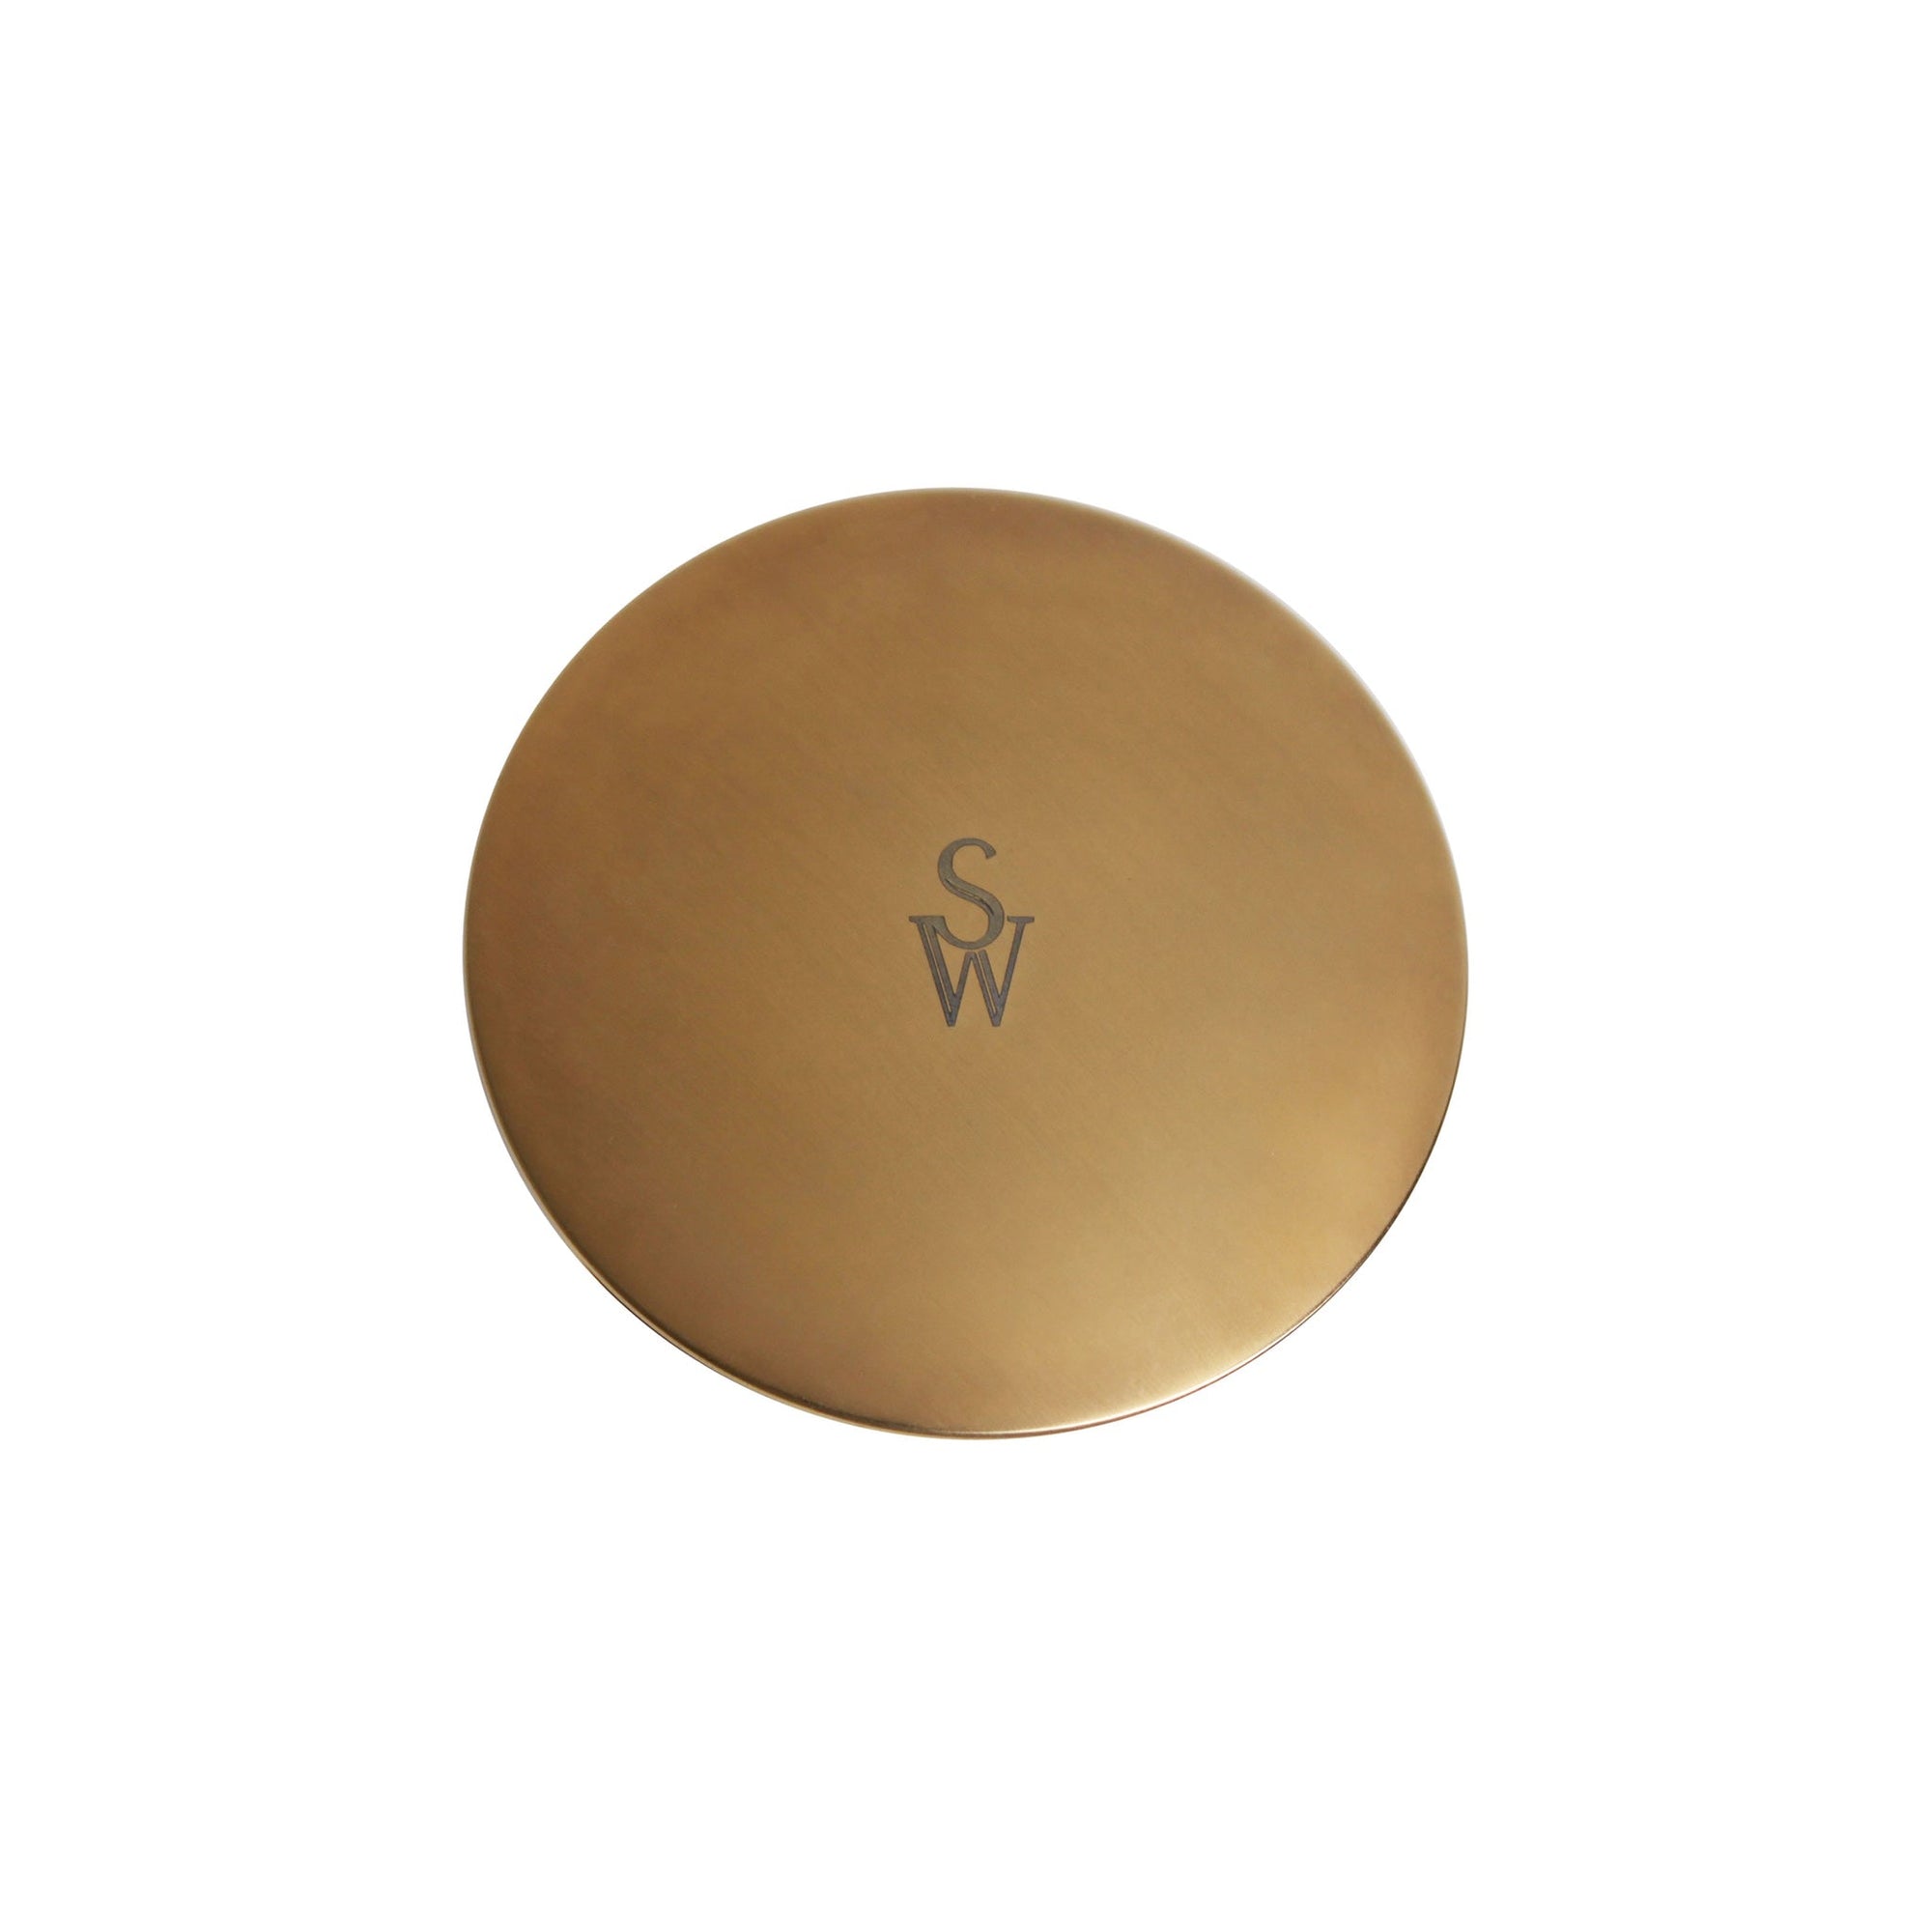 WSTE-ARCO-GP Sherle Wagner International Arco Waste Assembly in Gold Plate metal finish